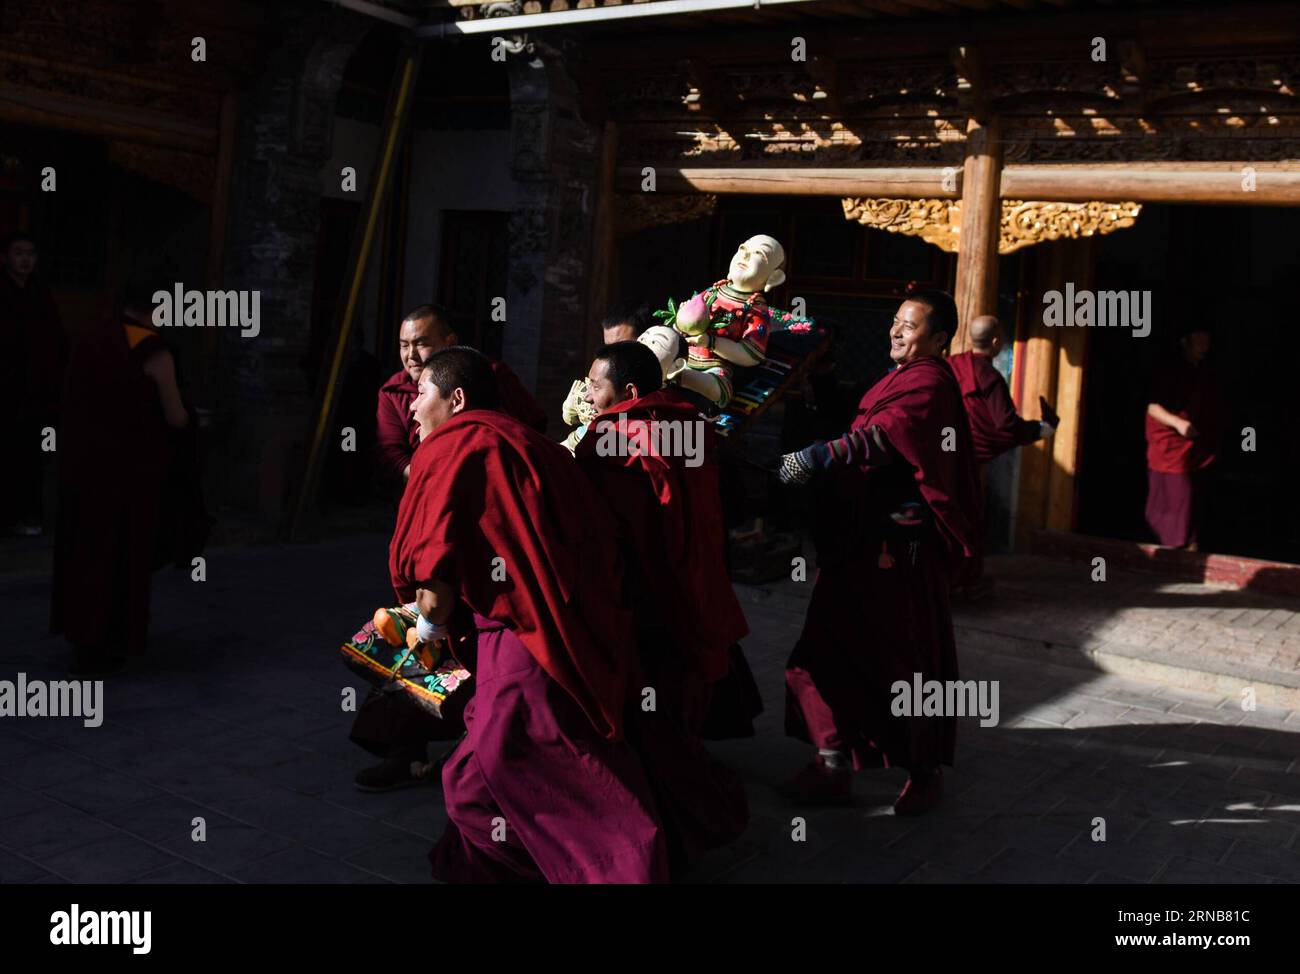 XINING, Feb. 22, 2016 -- Buddhists move butter sculptures to a platform at Taer Monastery in Huangzhong County of northwest China s Qinghai Province, Feb. 22, 2016. An exhibition of butter sculptures was held on Monday at Taer Monastery, which is the birth place of Tsongkhapa, founder of the Geluk school of Tibetan Buddhism. ) (dhf) CHINA-QINGHAI-TAER MONASTERY-BUTTER SCULPTURE (CN) WuxGang PUBLICATIONxNOTxINxCHN   Xining Feb 22 2016 Buddhists Move Butter Sculptures to a Platform AT Taer monastery in Huang Zhong County of Northwest China S Qinghai Province Feb 22 2016 to Exhibition of Butter S Stock Photo